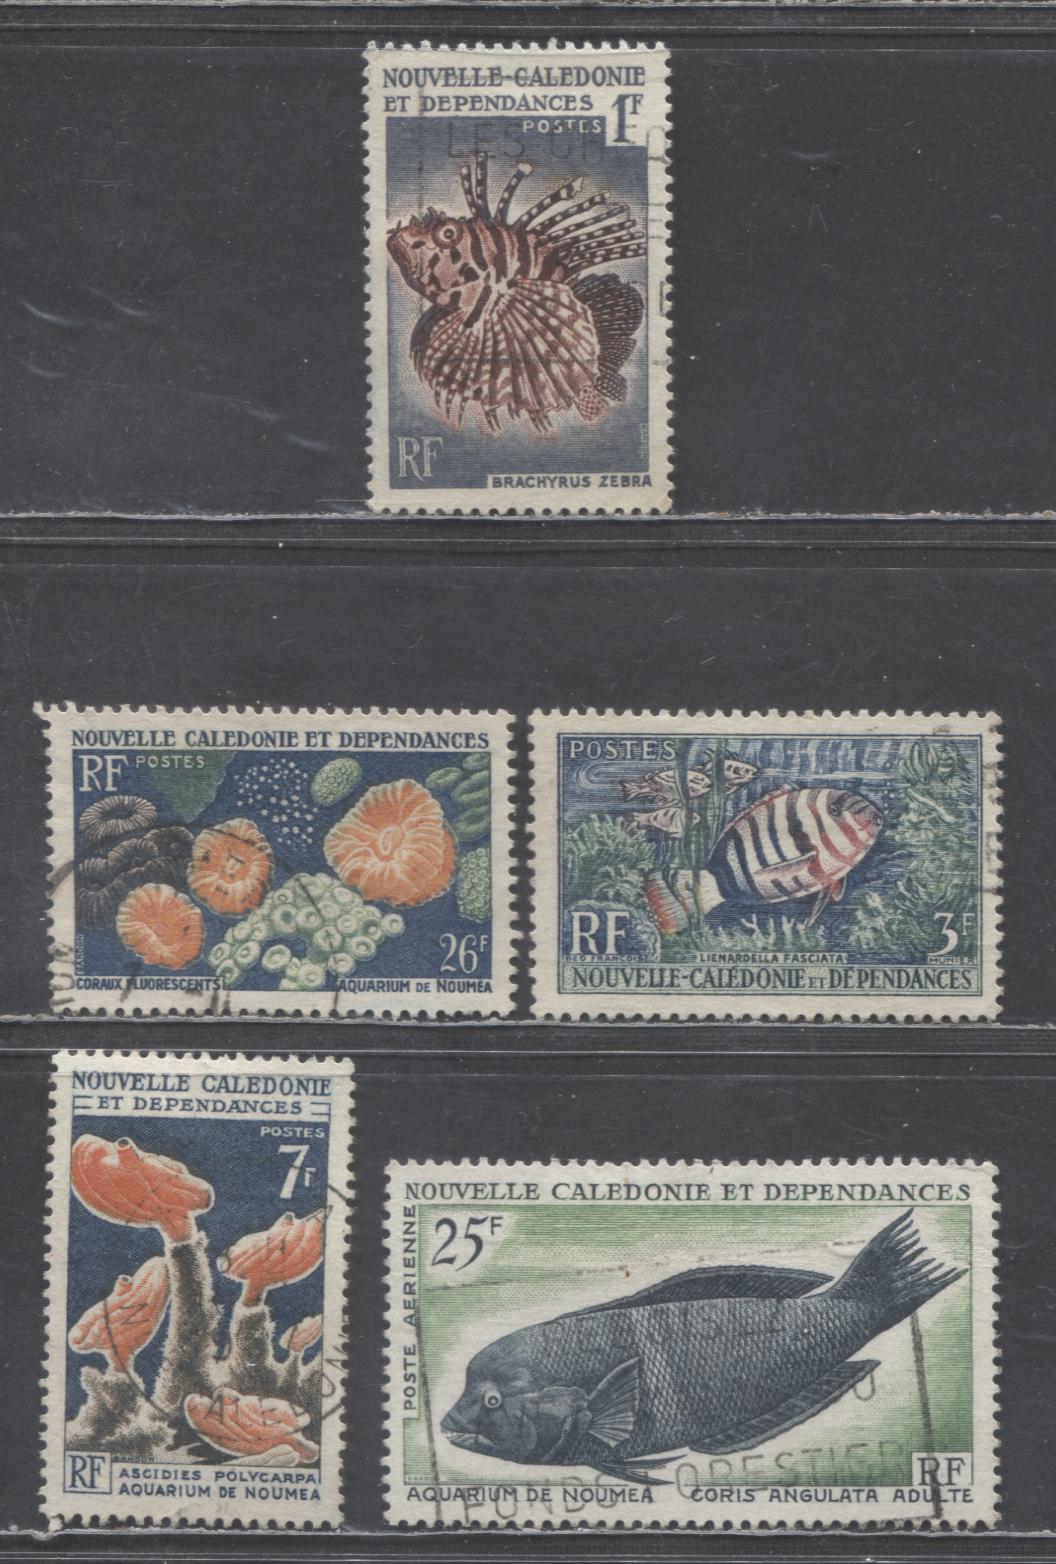 Lot 134 New Caledonia SC#307/C43 1959-1964-1965 Fish/Coral, Airmail & Sea Squirts Issues, 5 Very Fine Used Singles, Click on Listing to See ALL Pictures, 2017 Scott Cat. $10.75